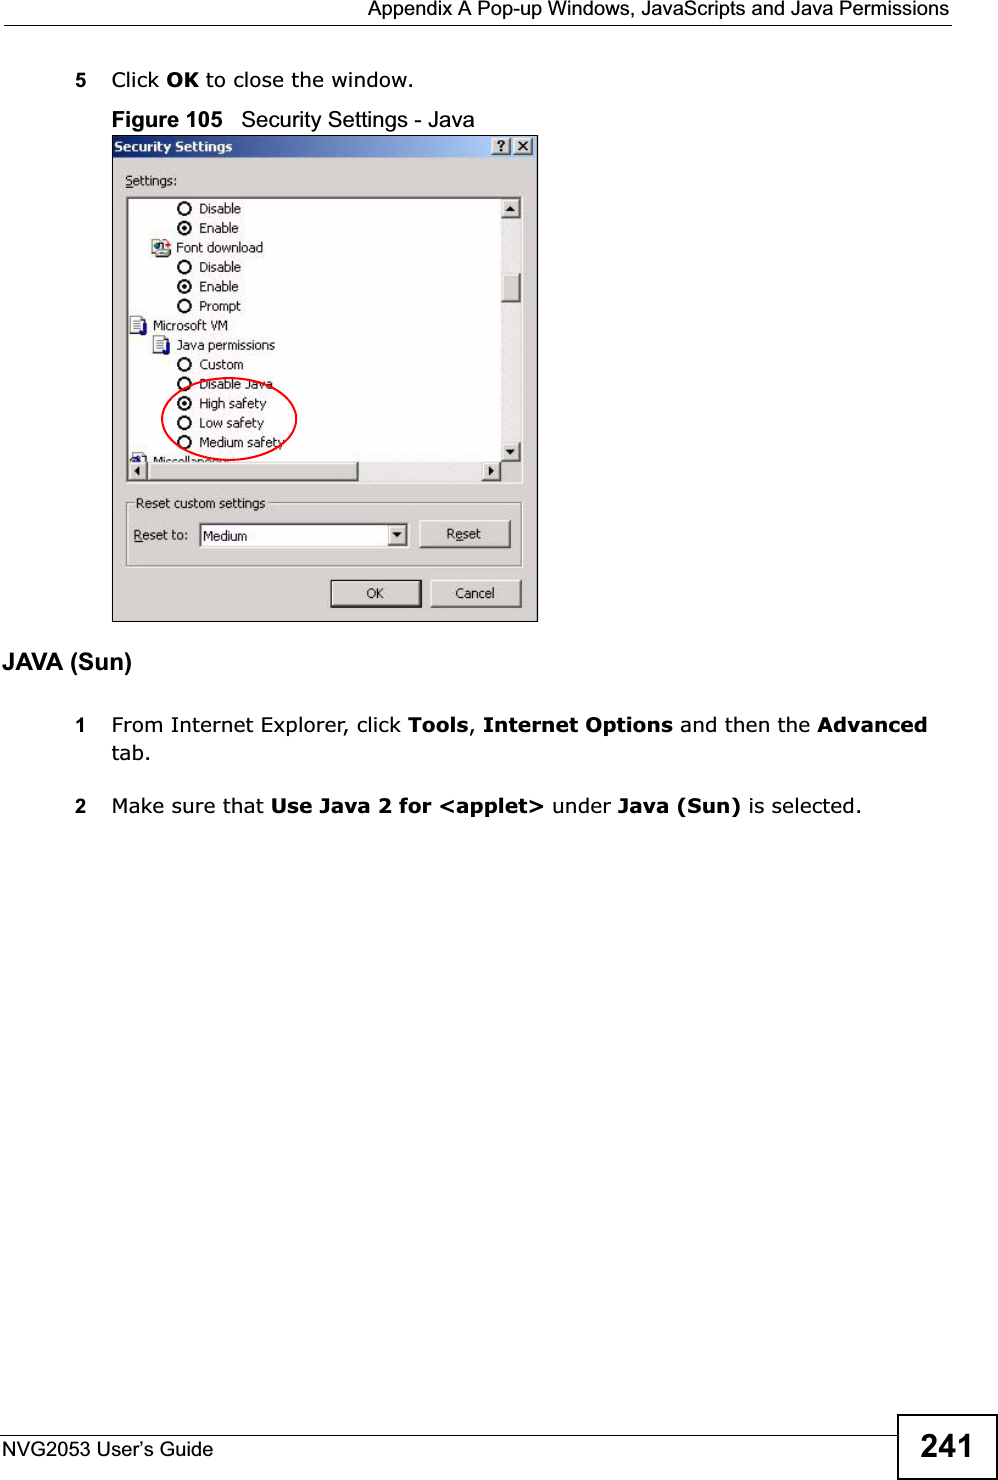  Appendix A Pop-up Windows, JavaScripts and Java PermissionsNVG2053 User’s Guide 2415Click OK to close the window.Figure 105   Security Settings - Java JAVA (Sun)1From Internet Explorer, click Tools,Internet Options and then the Advancedtab. 2Make sure that Use Java 2 for &lt;applet&gt; under Java (Sun) is selected.